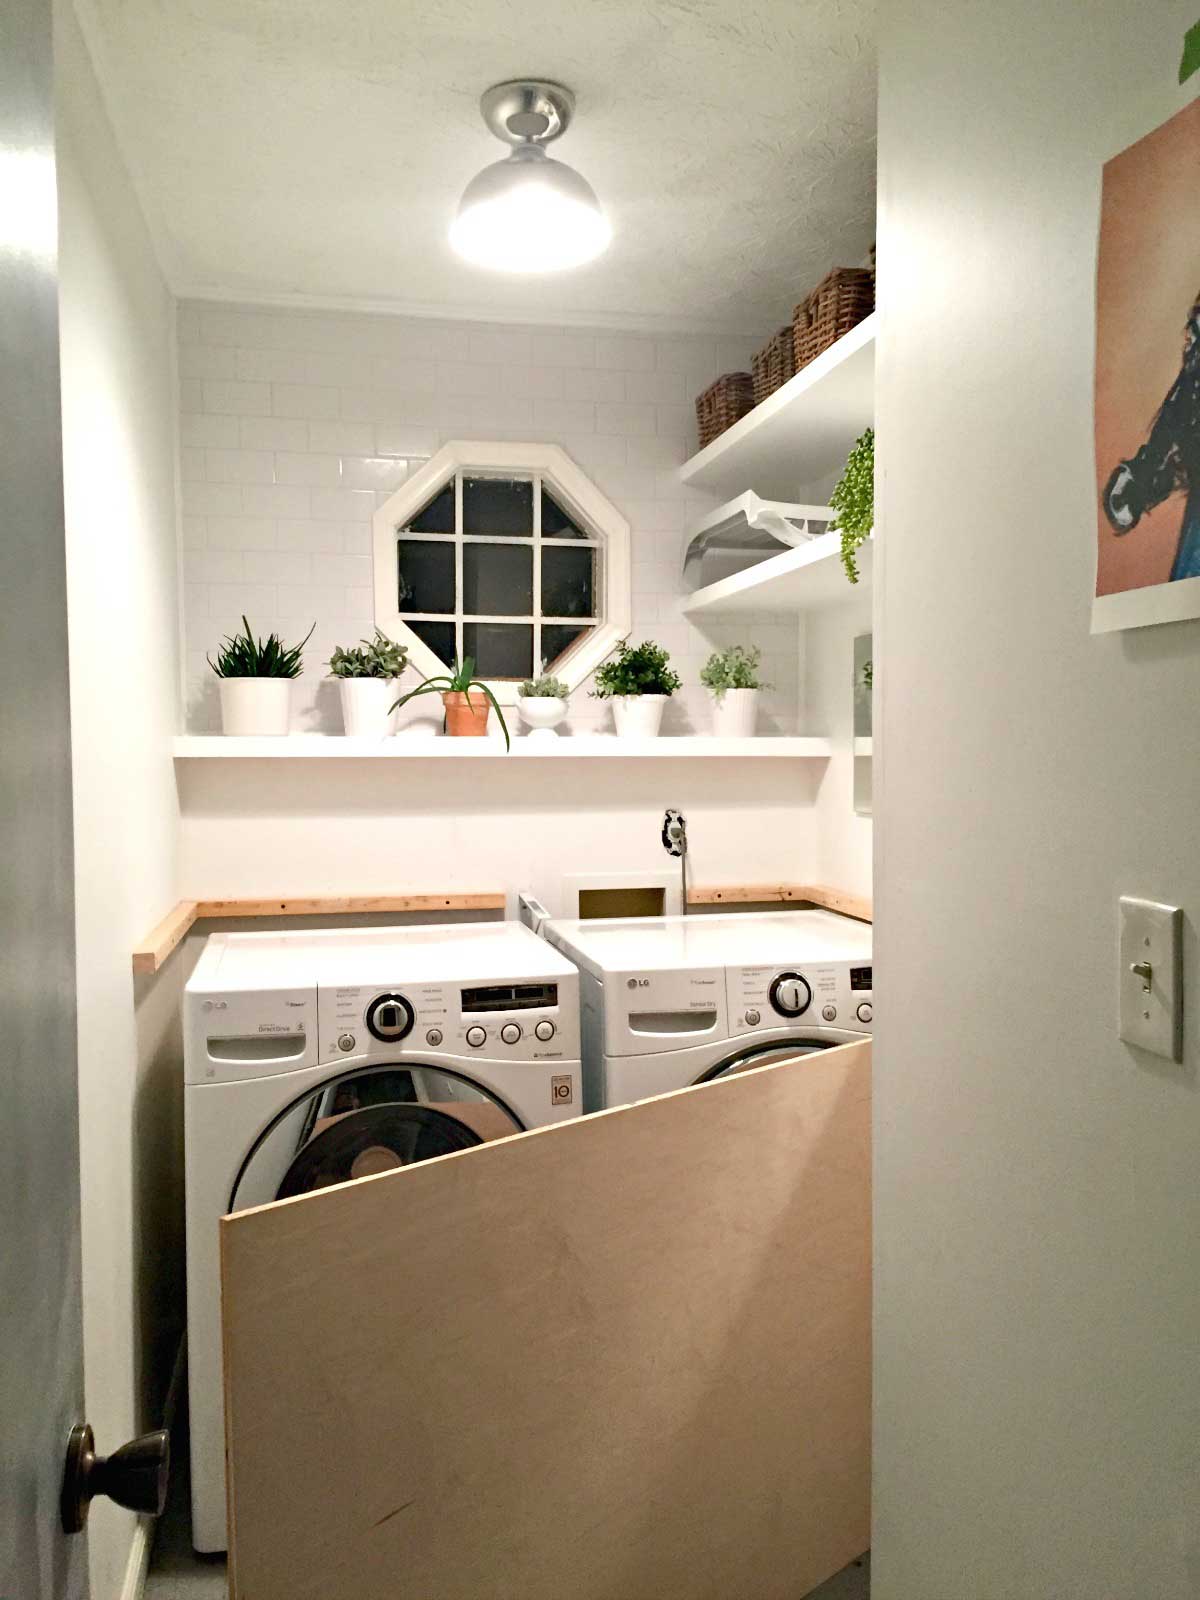 DIY Laundry Room Countertop Over Washer Dryer  Laundry room diy, Laundry  room countertop, Laundry room